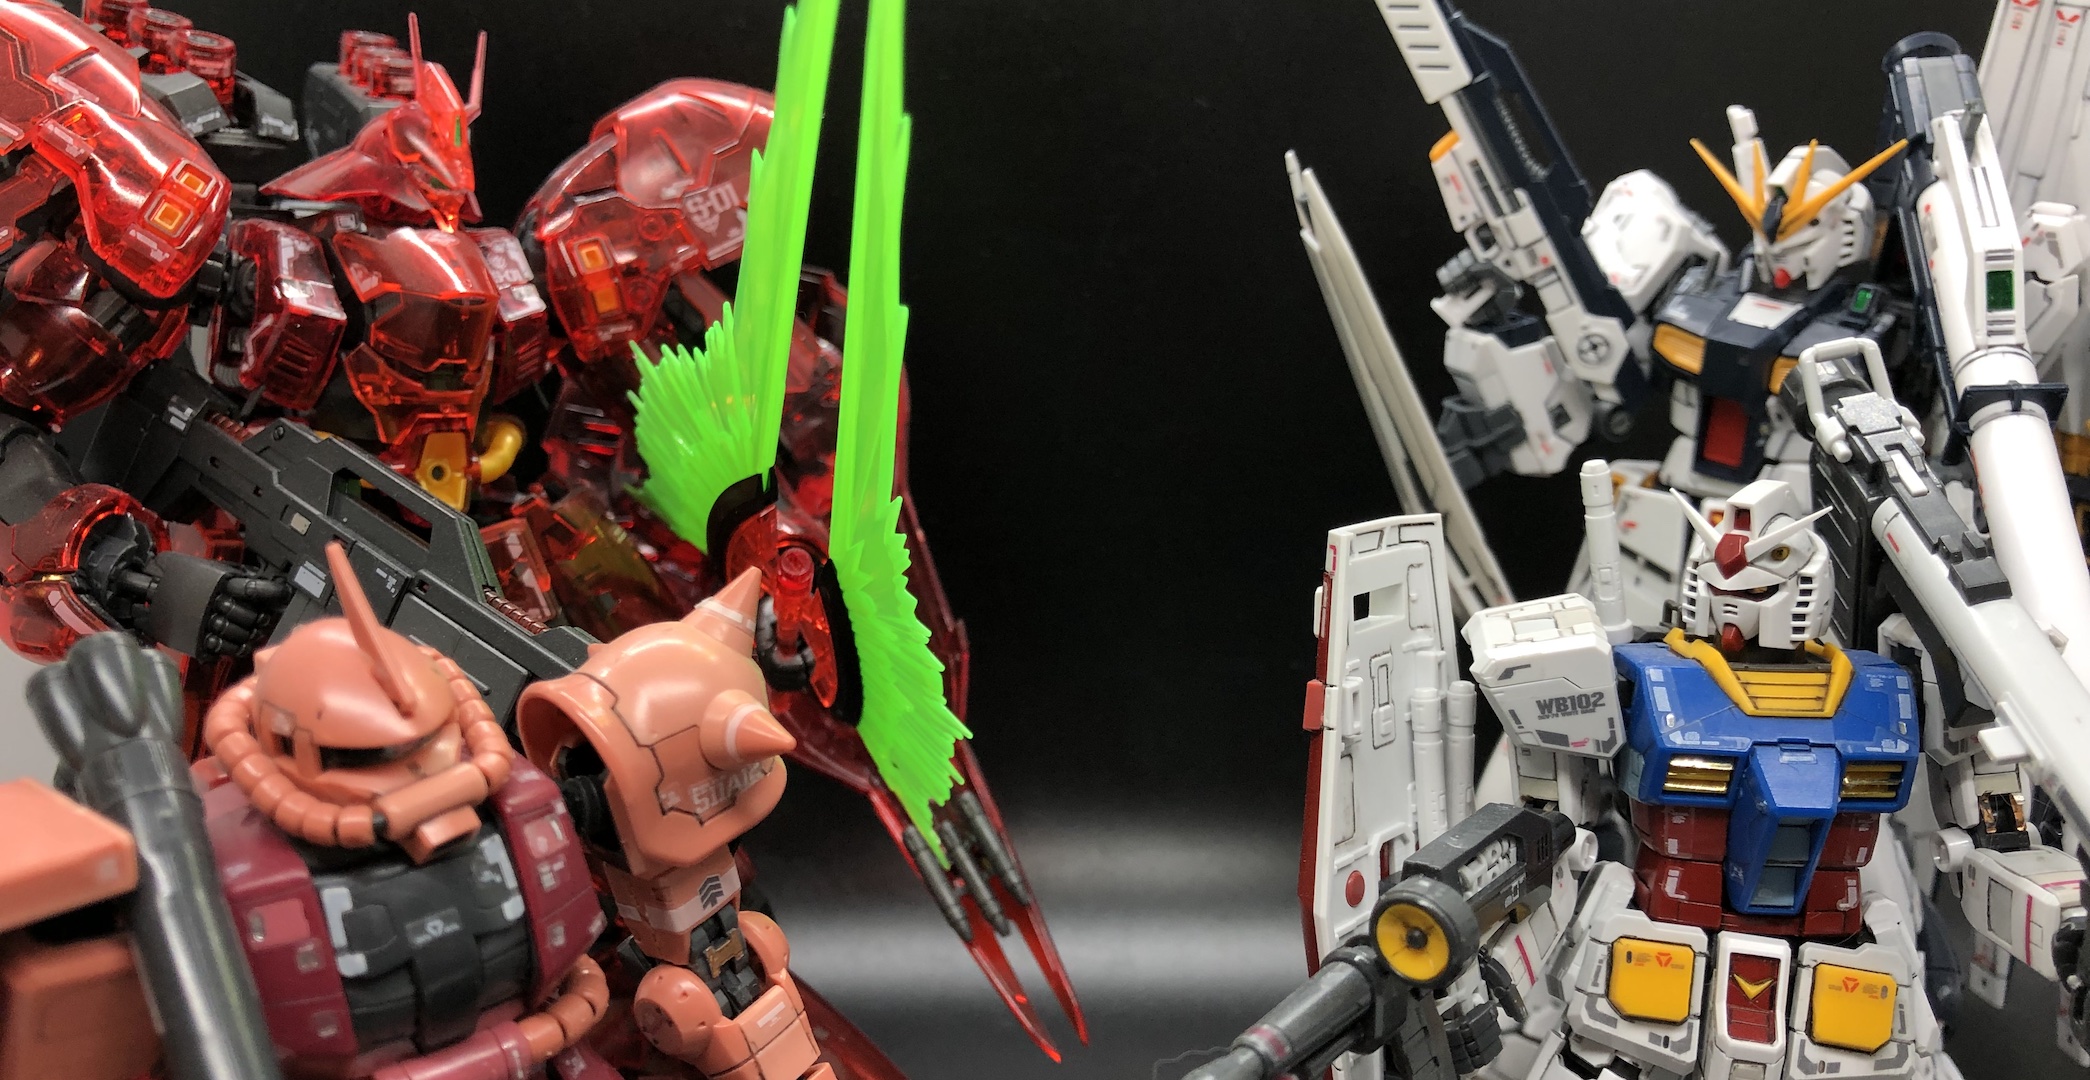 So what's the deal with these robots? Gunpla, Explained | Goonhammer